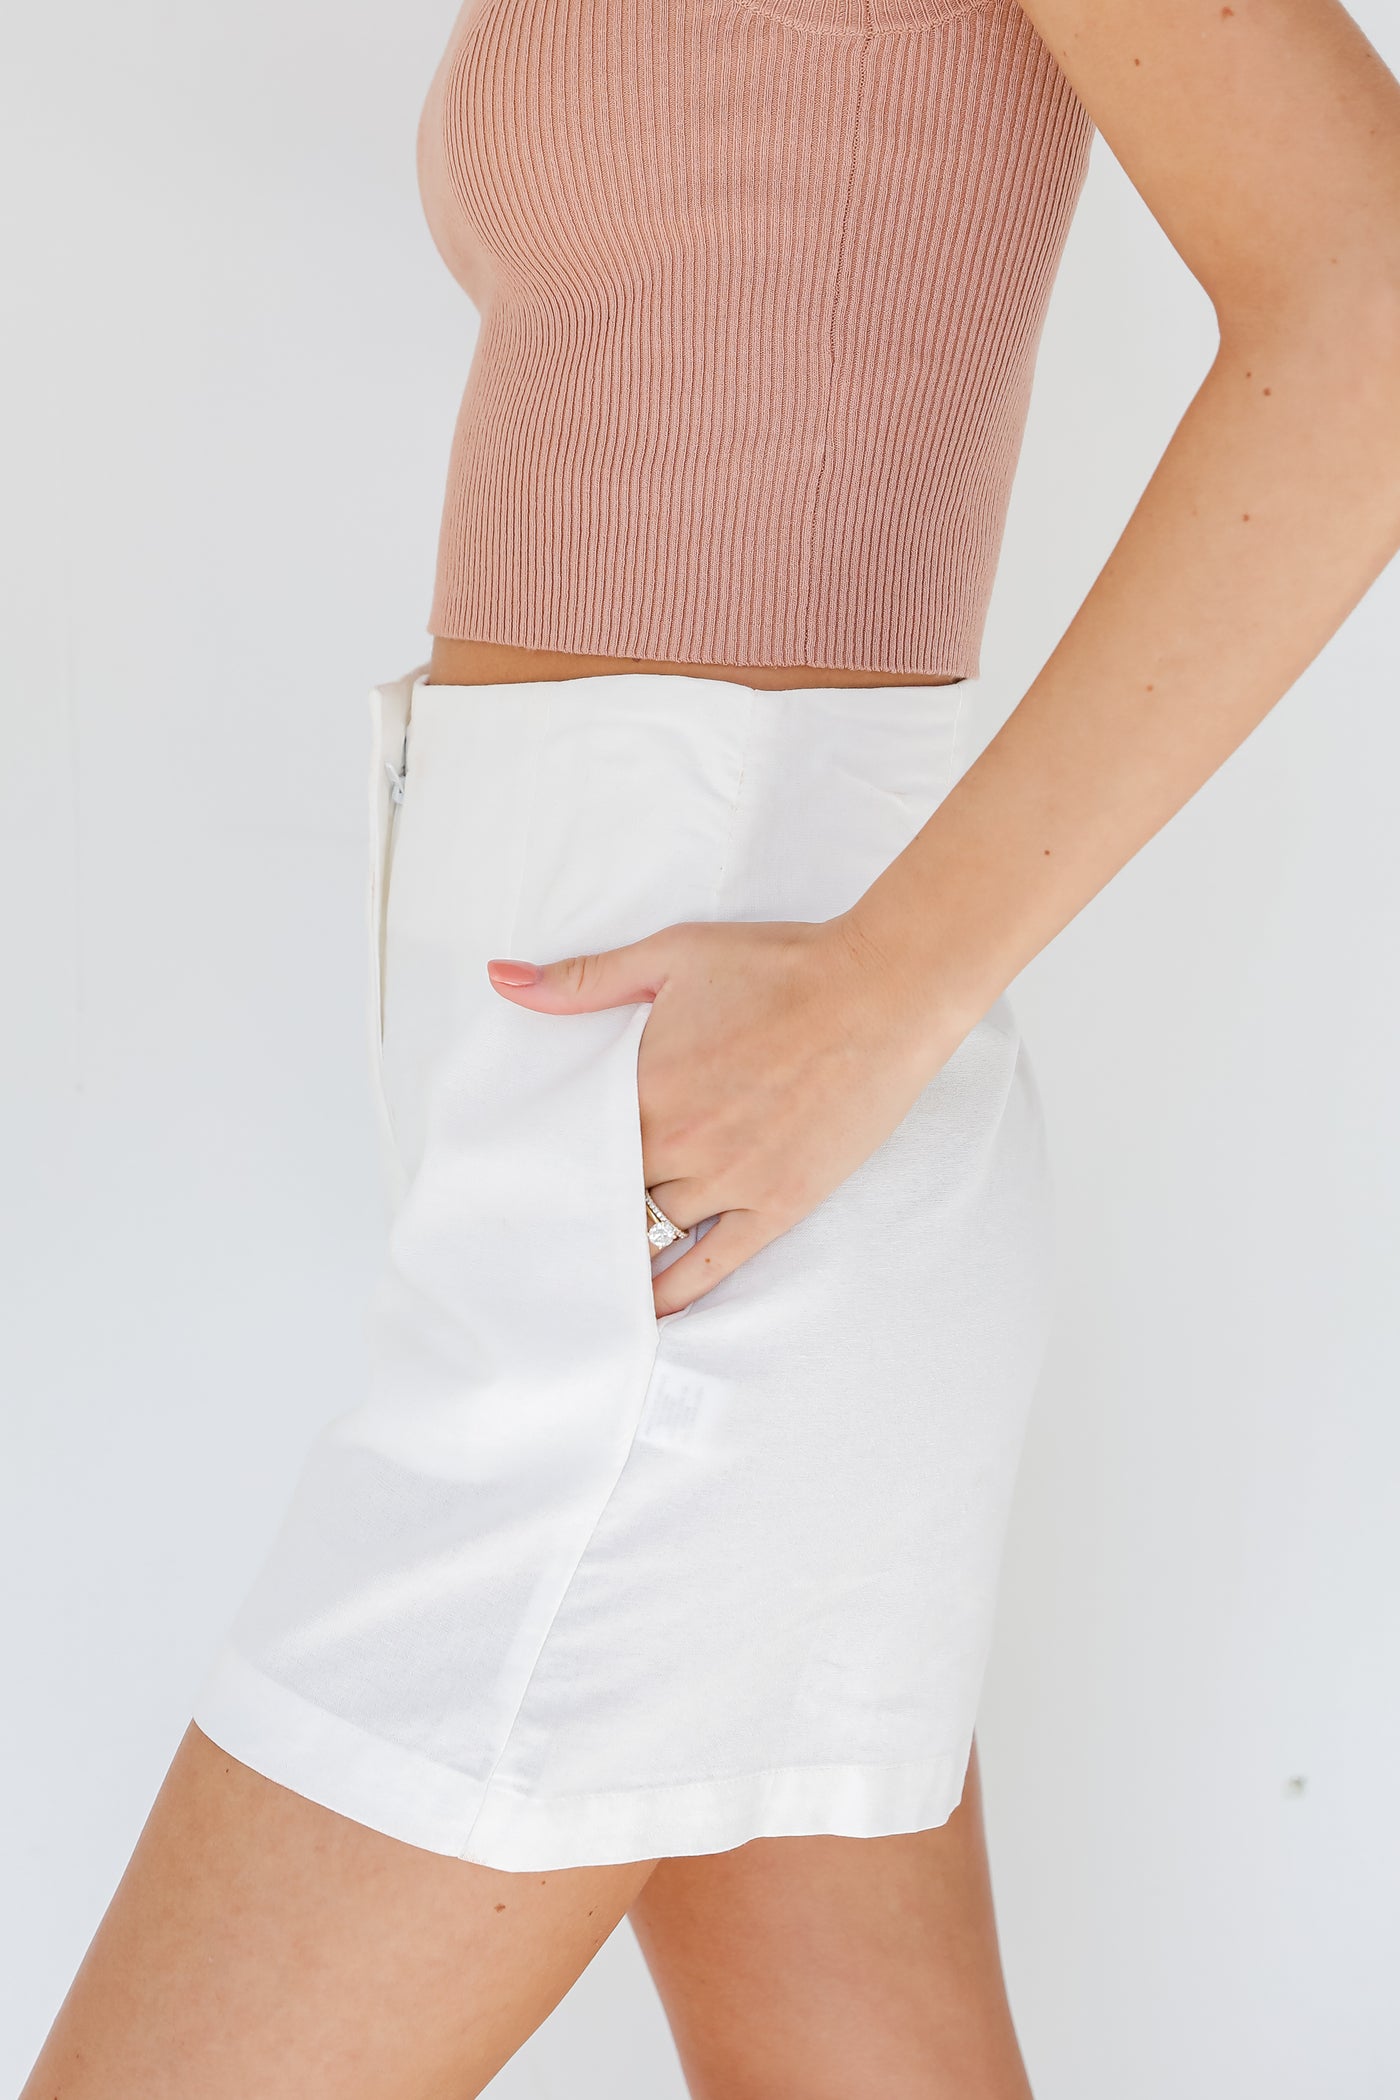 Linen Shorts in white side view